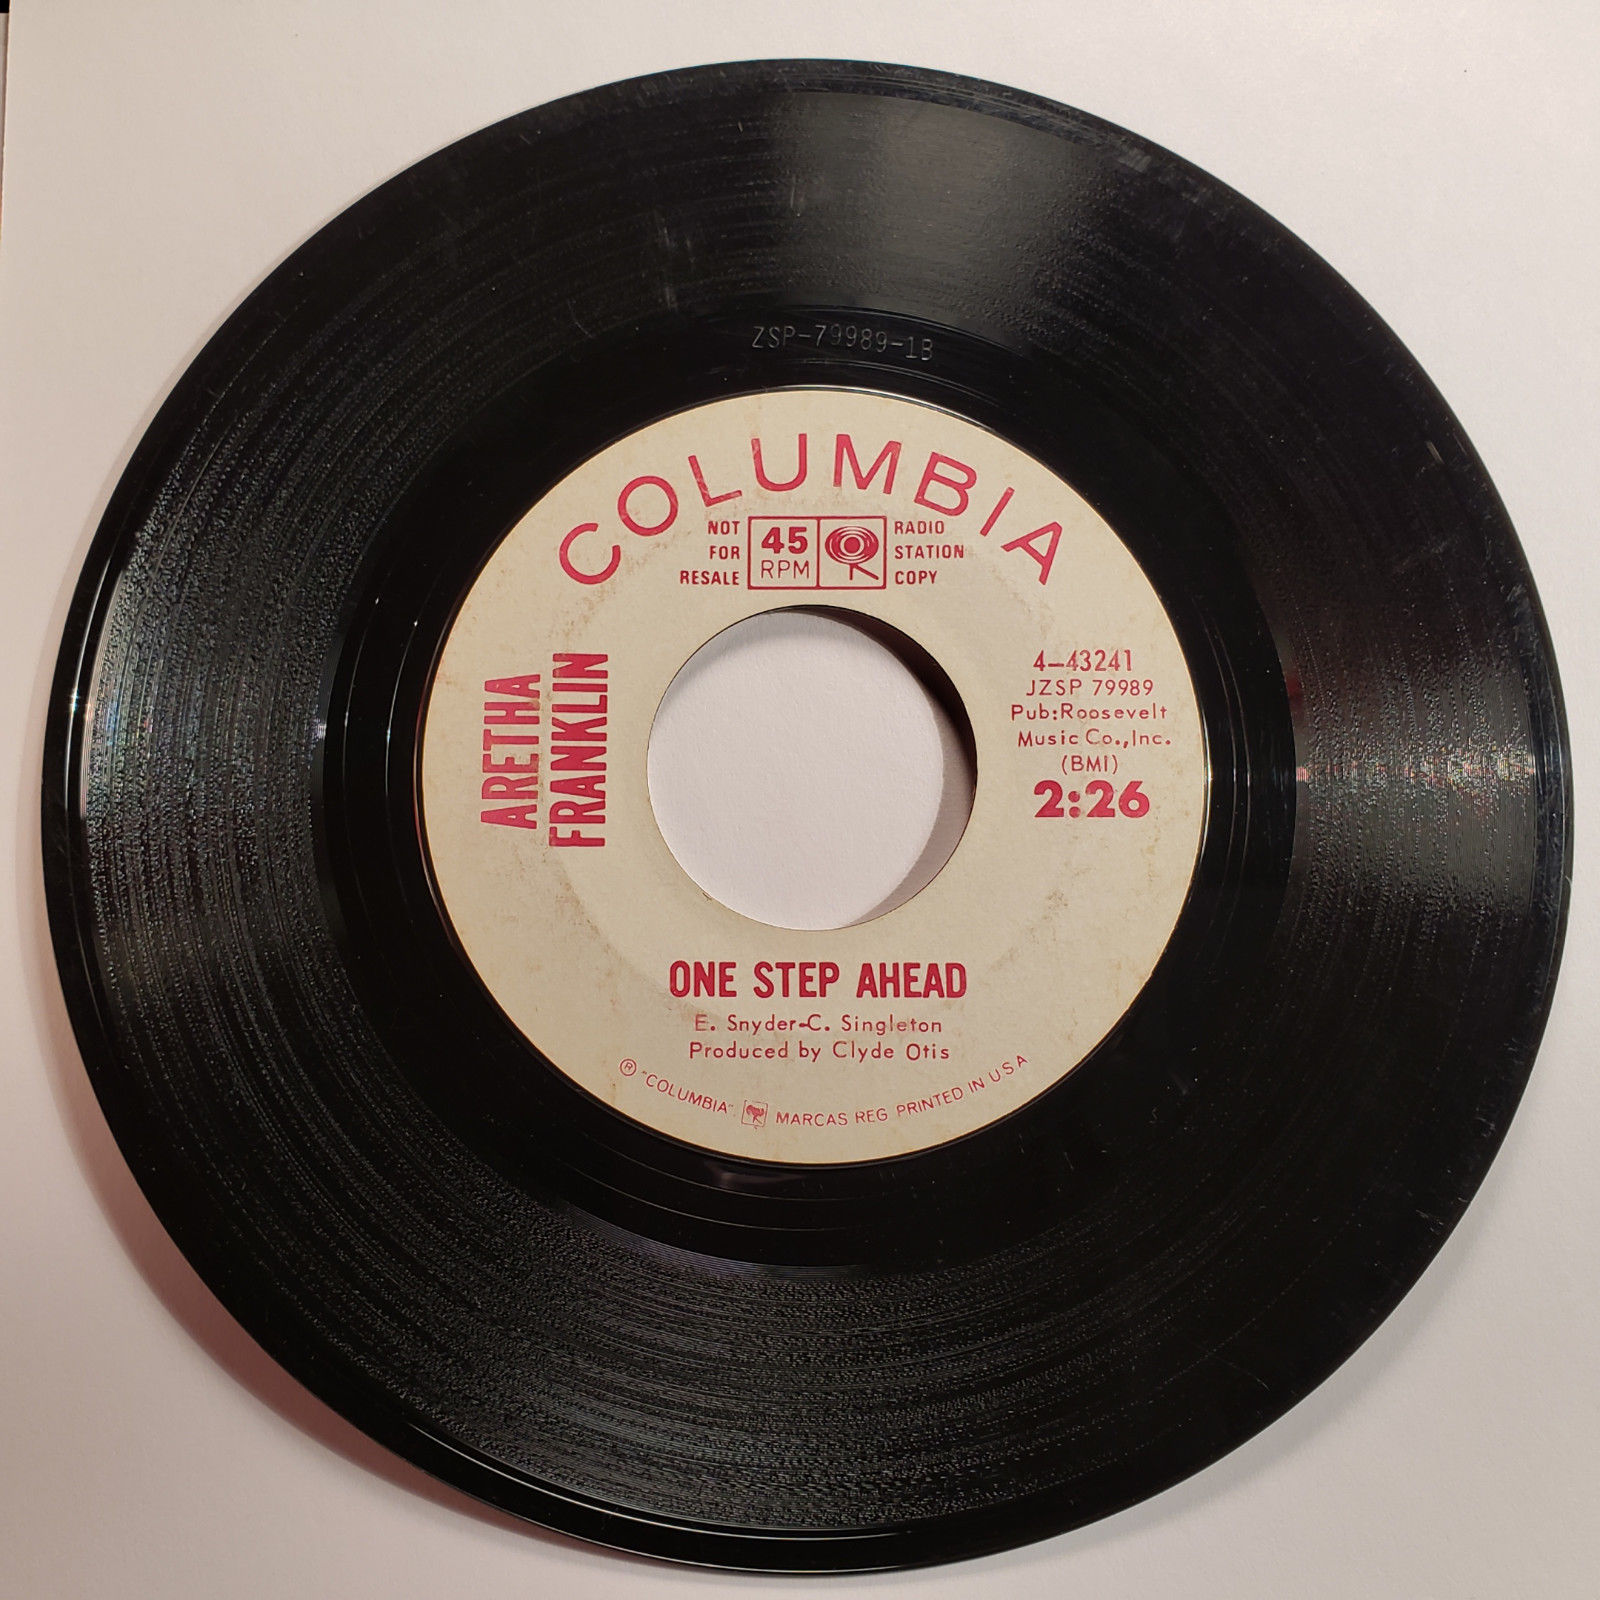 popsike.com - Aretha Franklin "One Step Ahead/I Can't Wait Until..."  45/Col/4-43241/VG+ PROMO - auction details